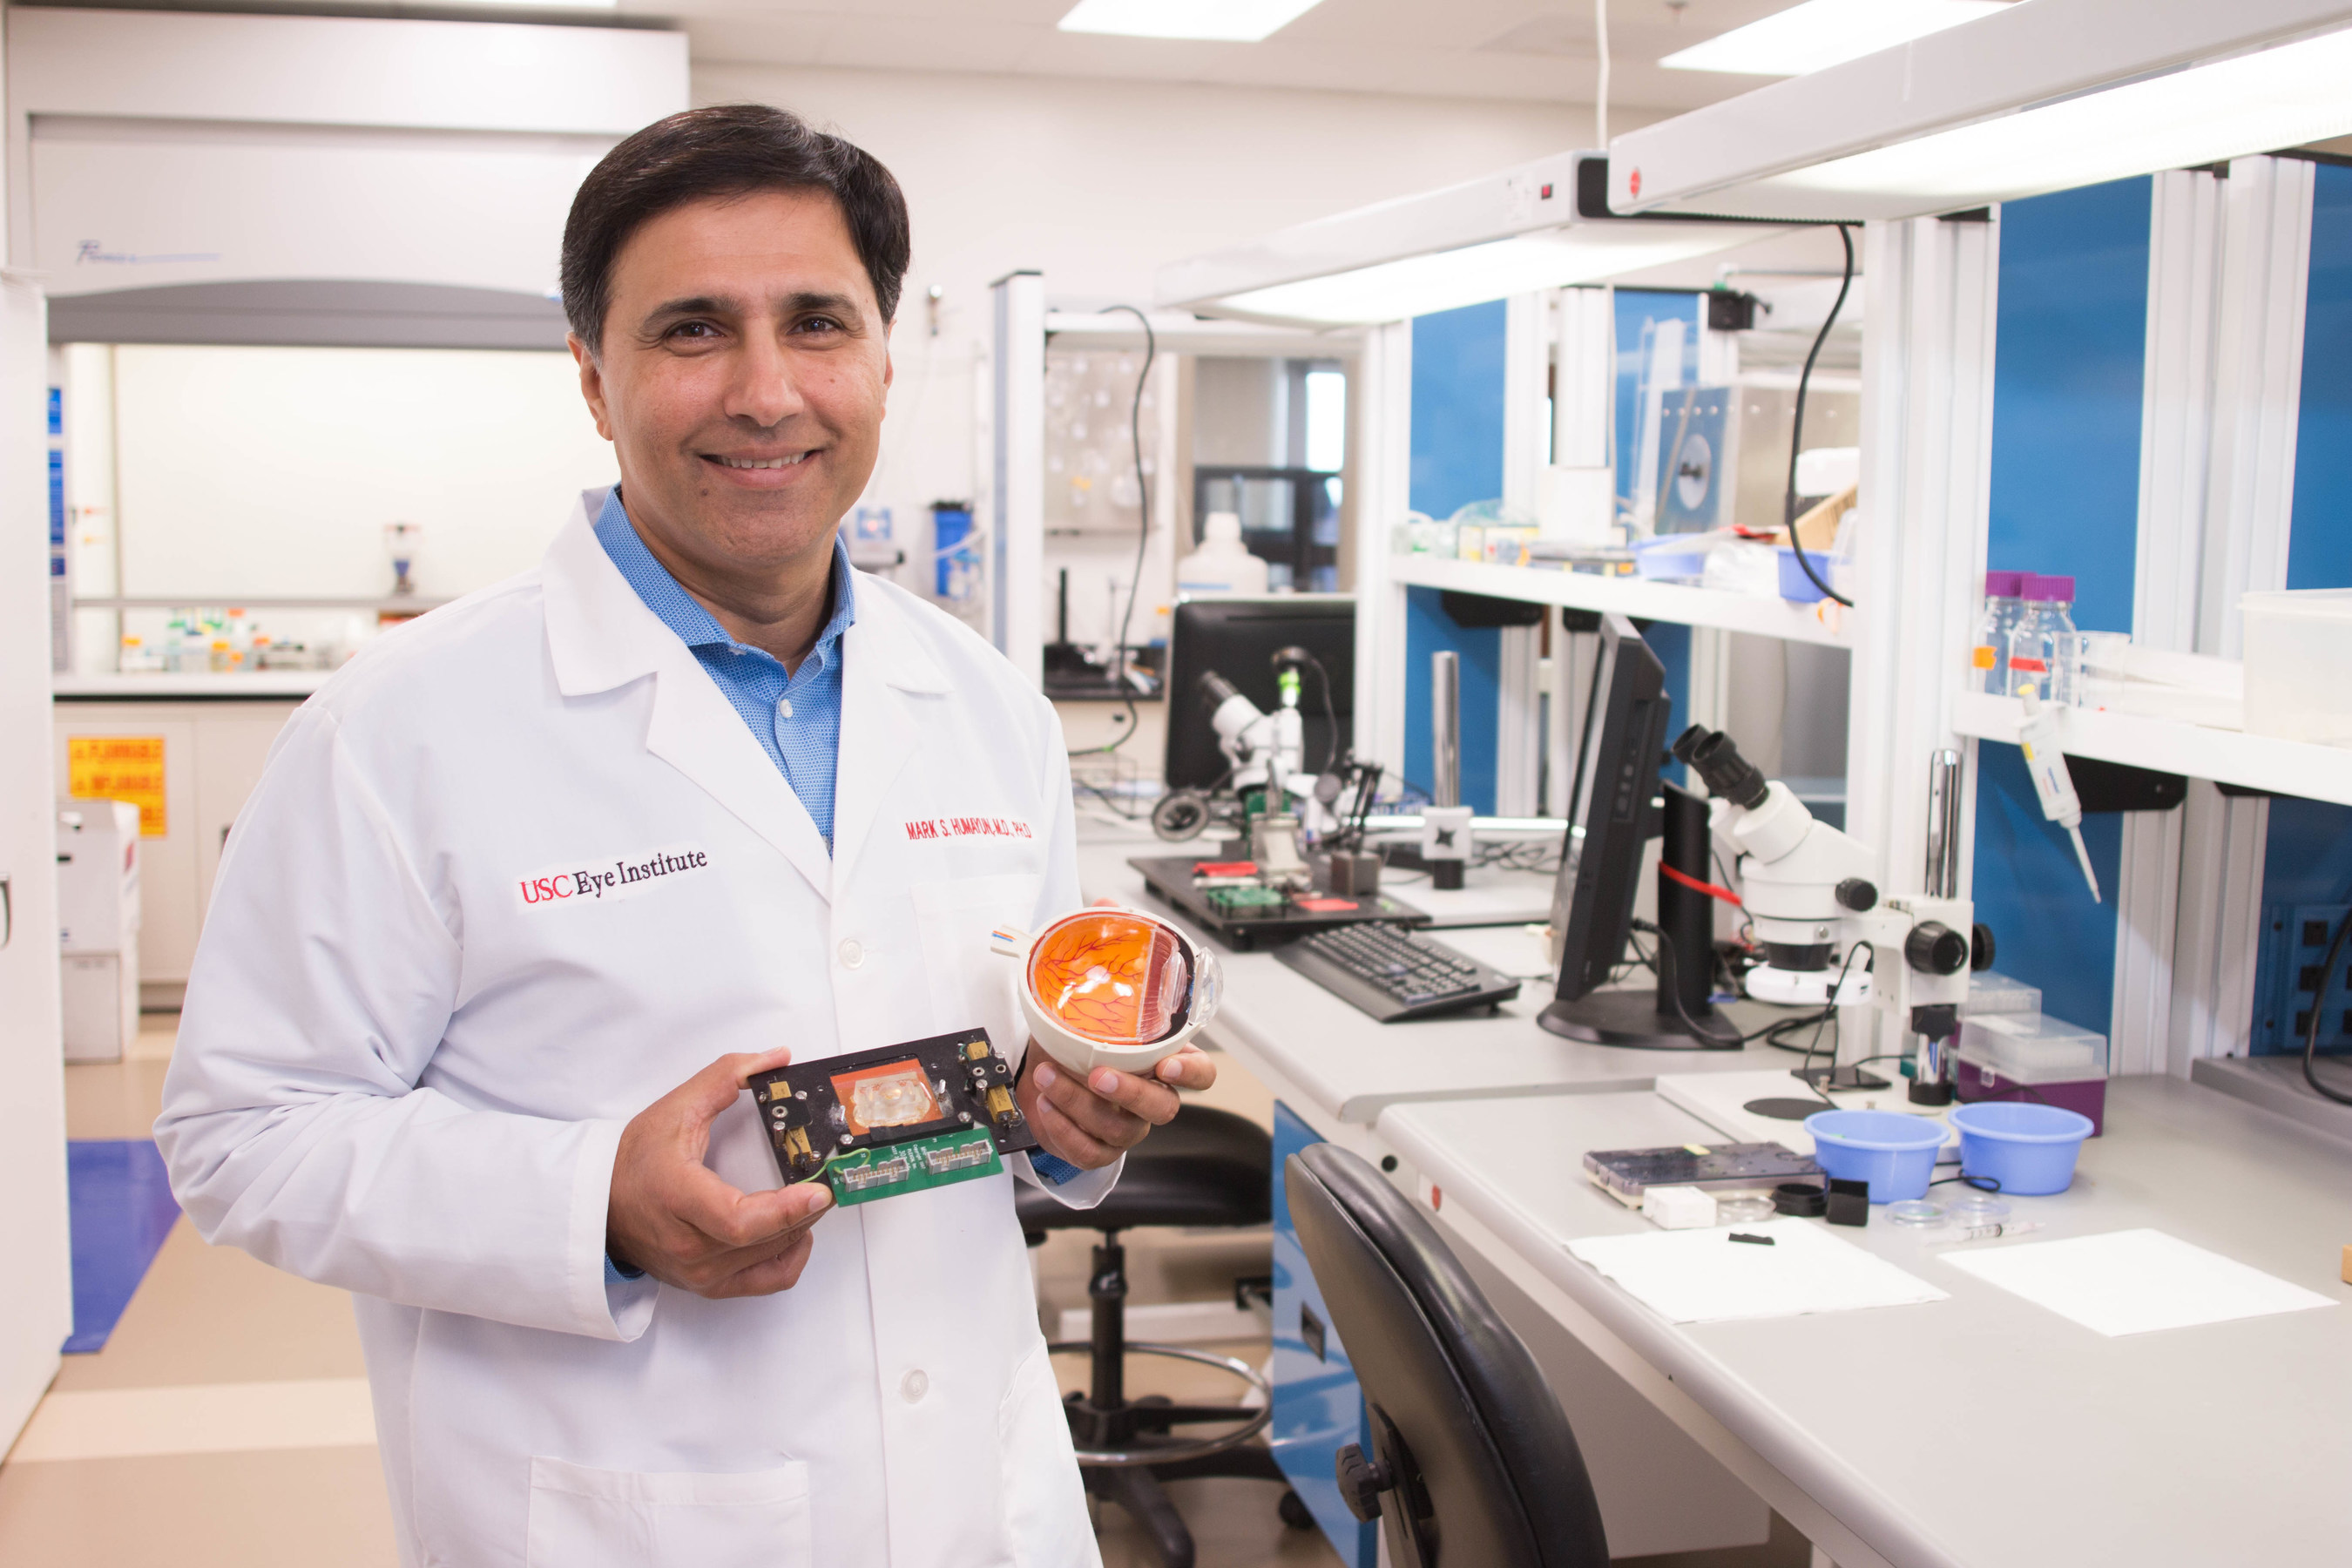 Mark S. Humayun, MD, PhD, co-director of the USC Eye Institute and creator of the Argus II retinal implant (seen in photo), to be awarded National Medal of Technology and Innovation by President Obama